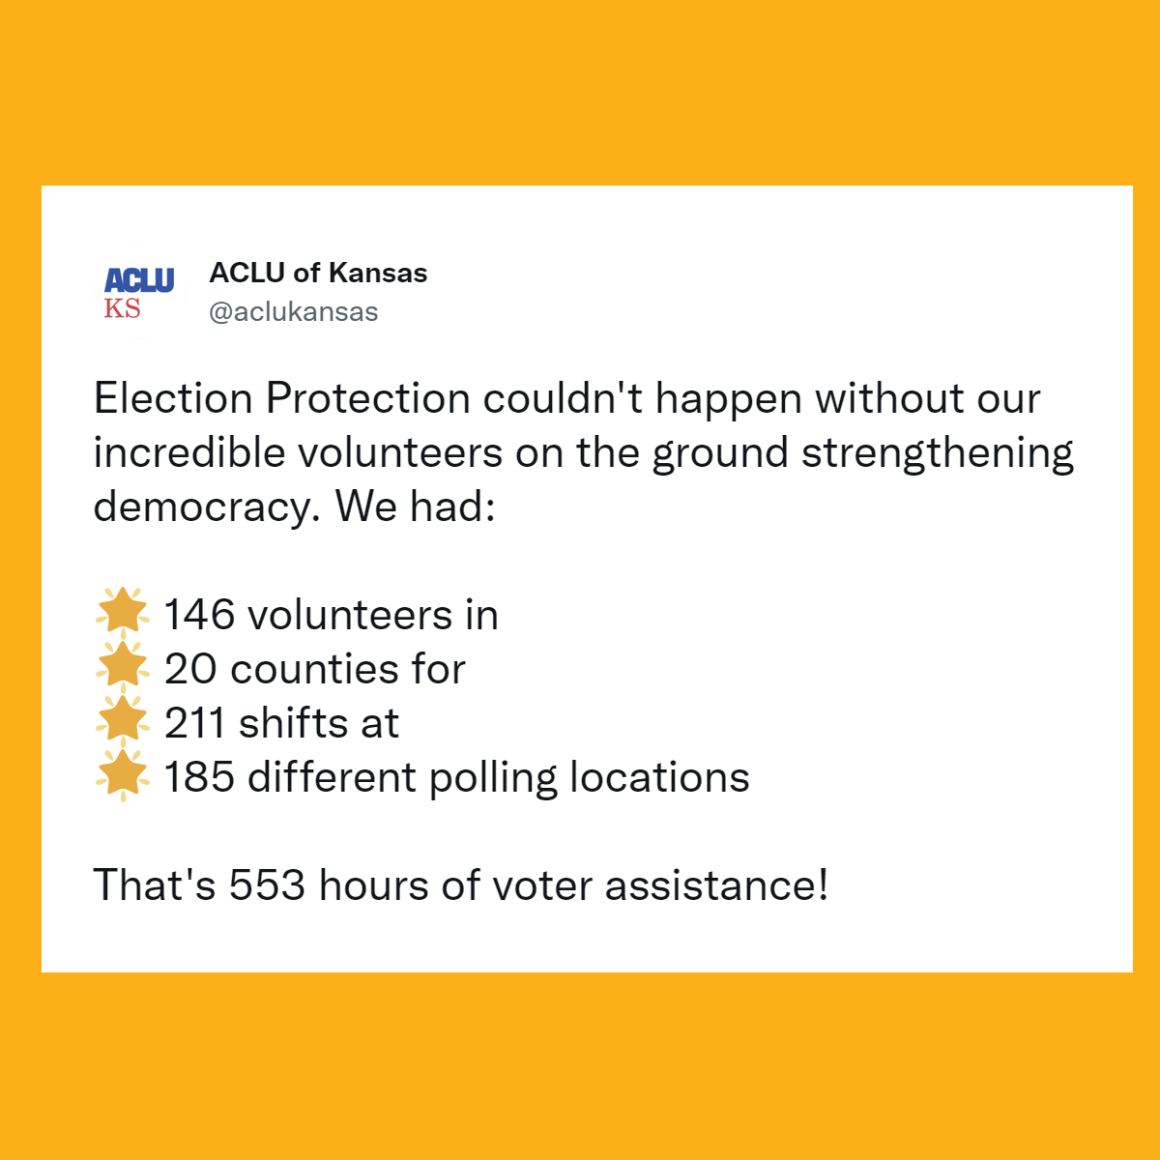 KS Election Protection had 146 volunteers in 20 counties